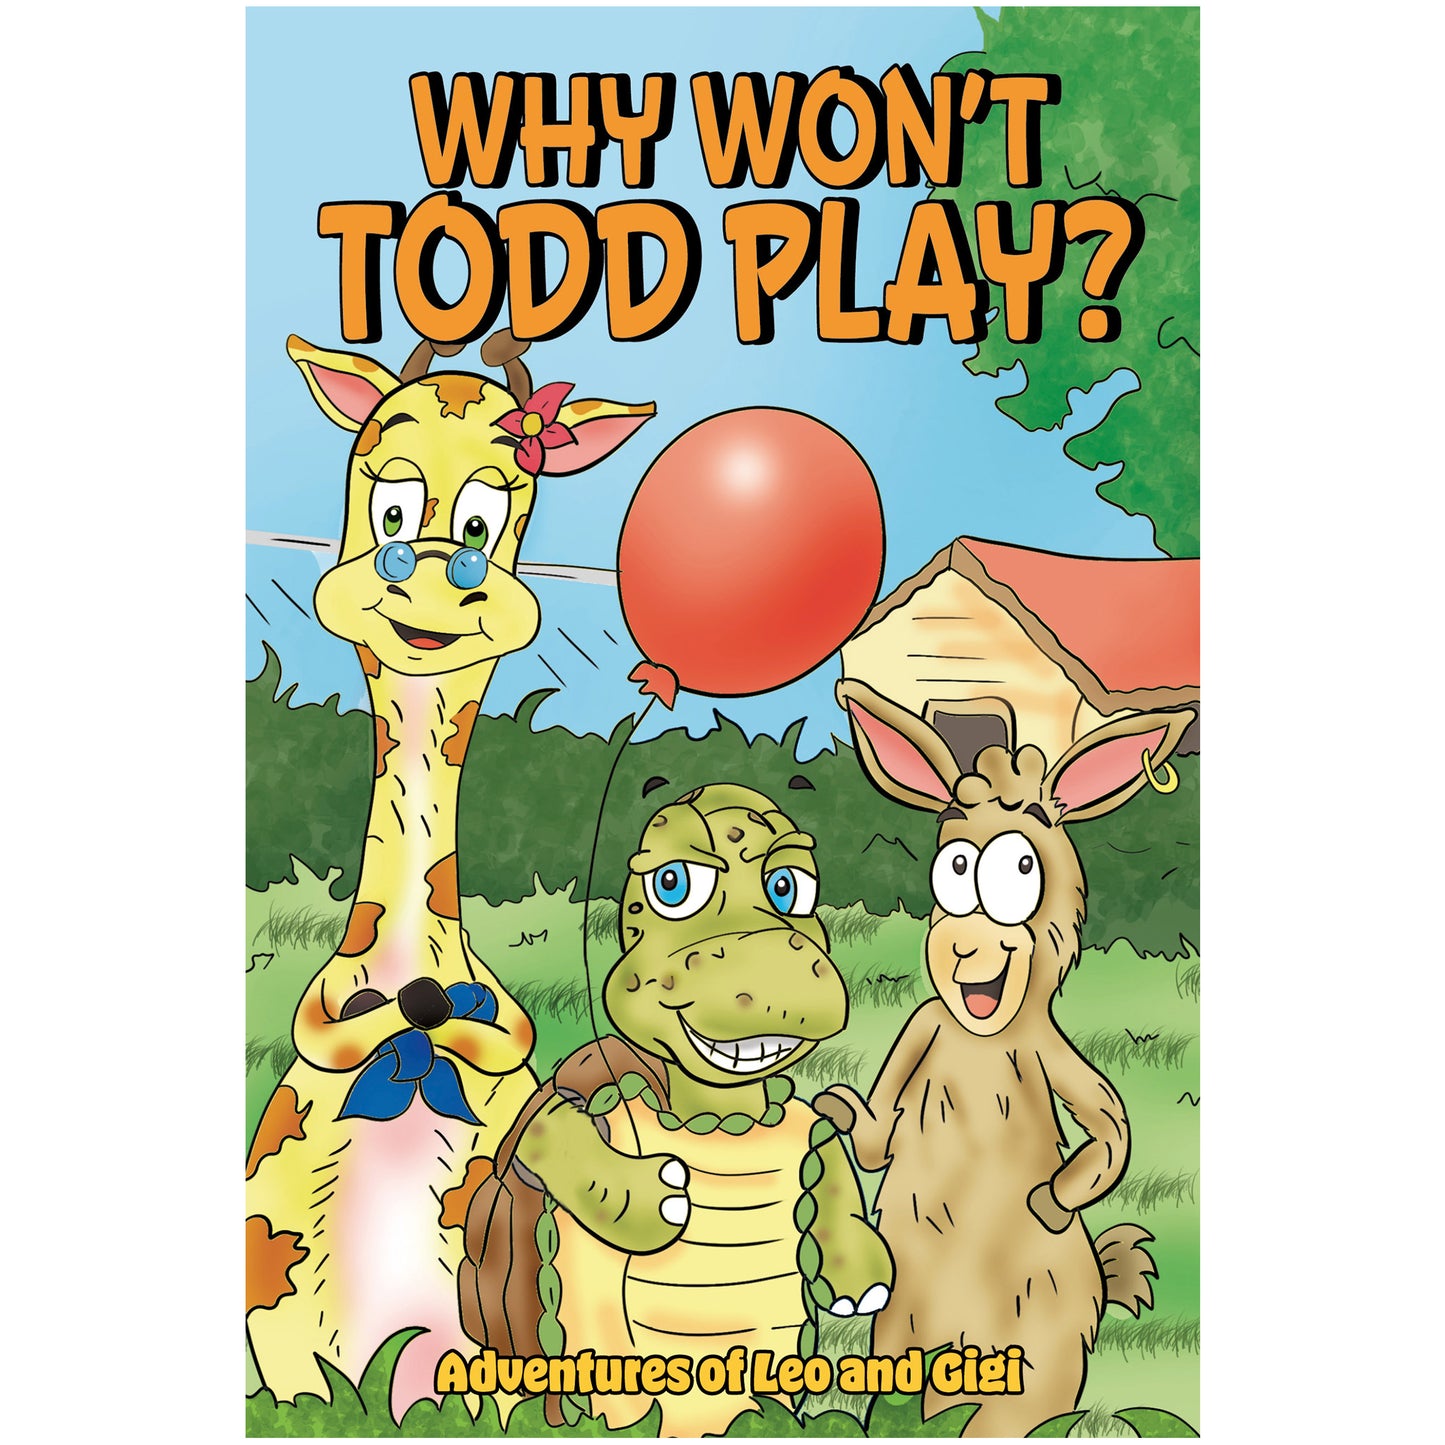 Why won't Todd Play?